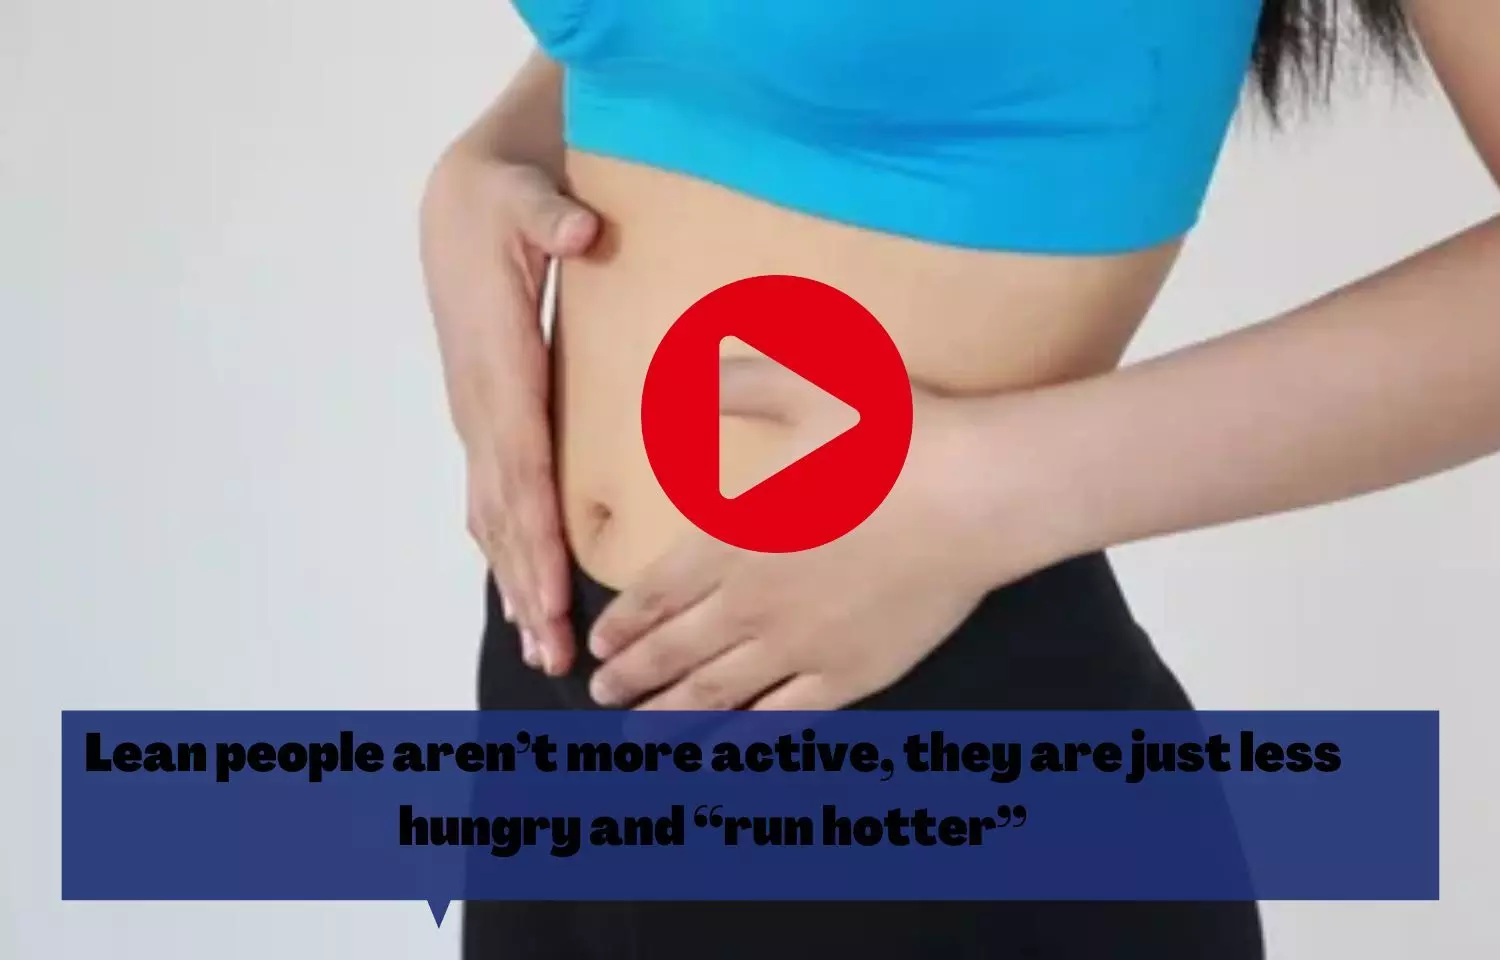 Lean people arent more active, they are just less hungry and run hotter